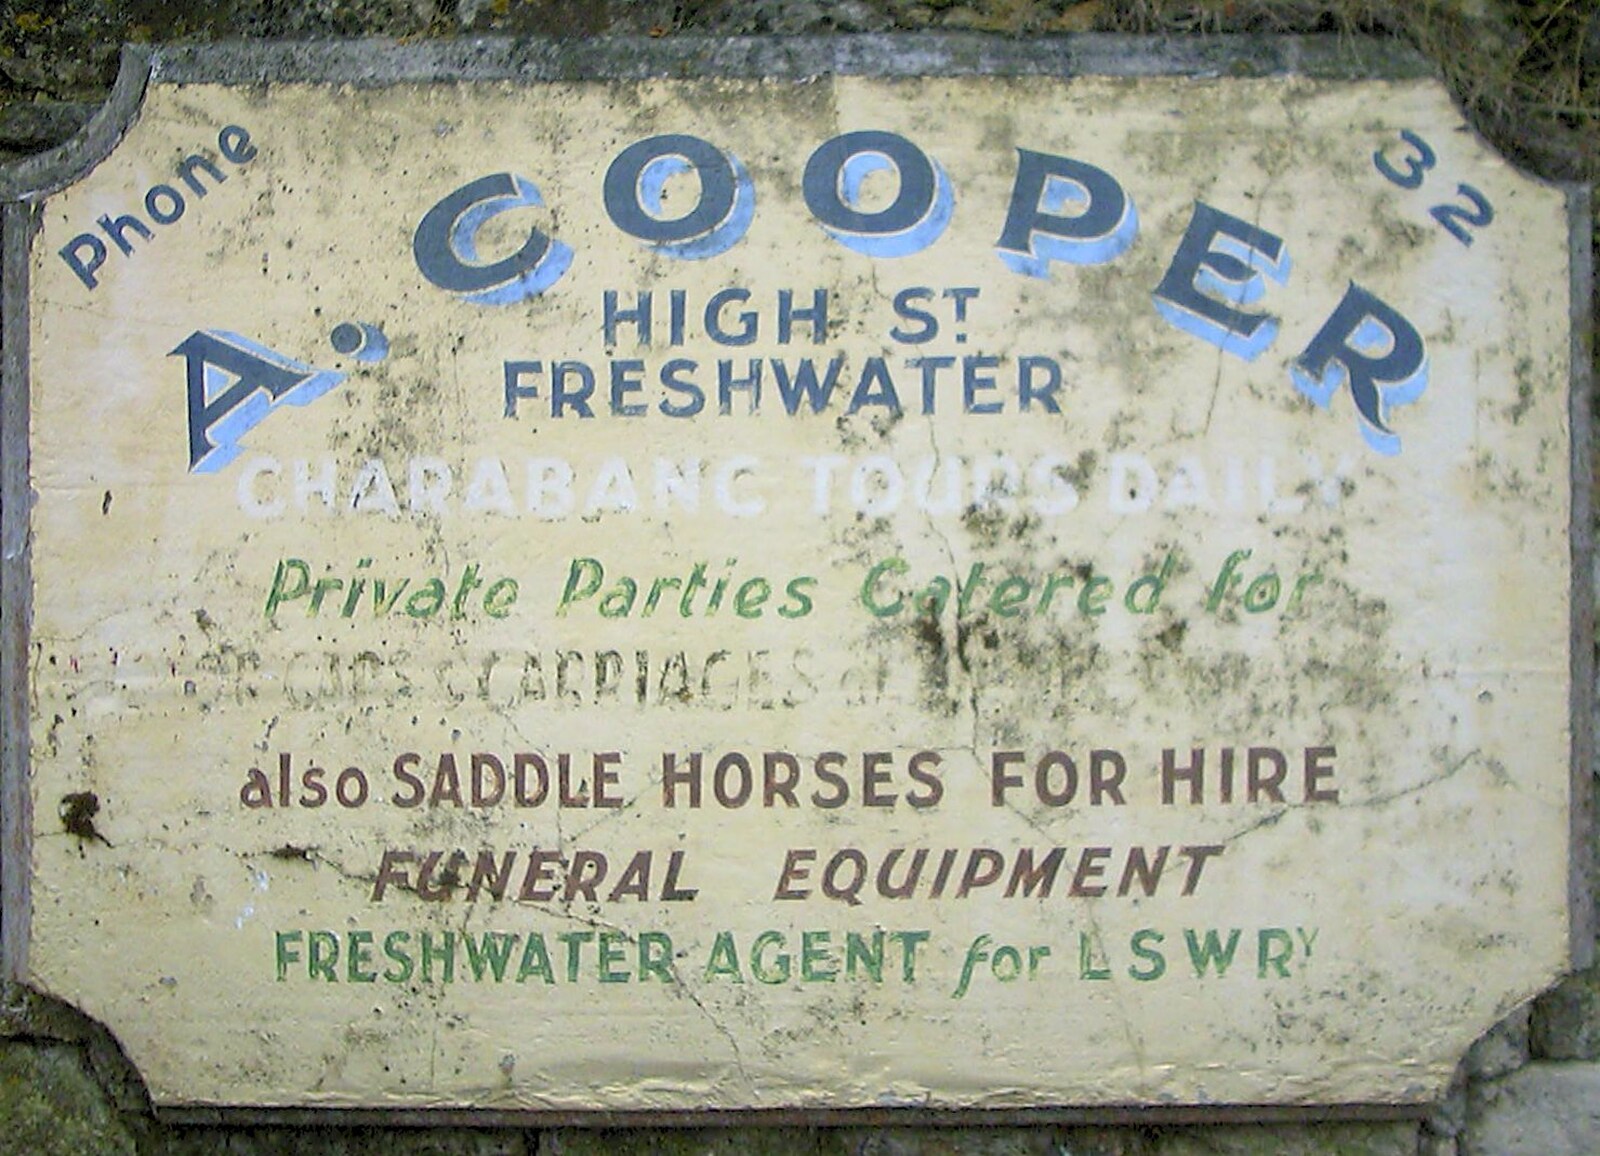 A possibly-1950s sign, featuring Charabanc tours from Cowes Weekend, Cowes, Isle of Wight - 7th August 2004